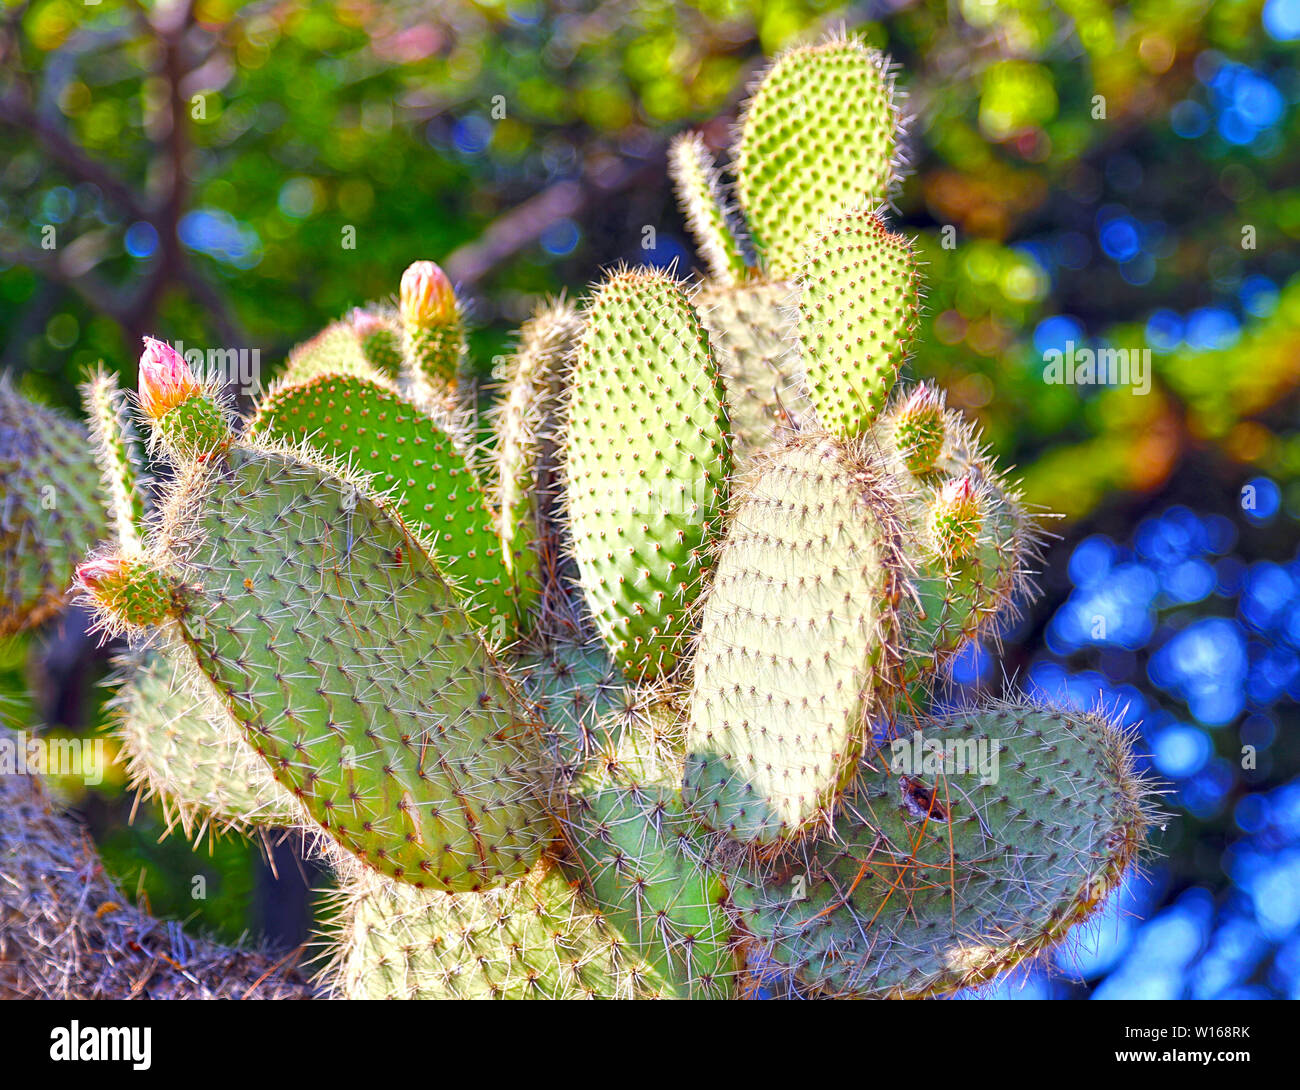 Opuntia basilaris, wide, flat cacti blooming in red flowers, background Stock Photo